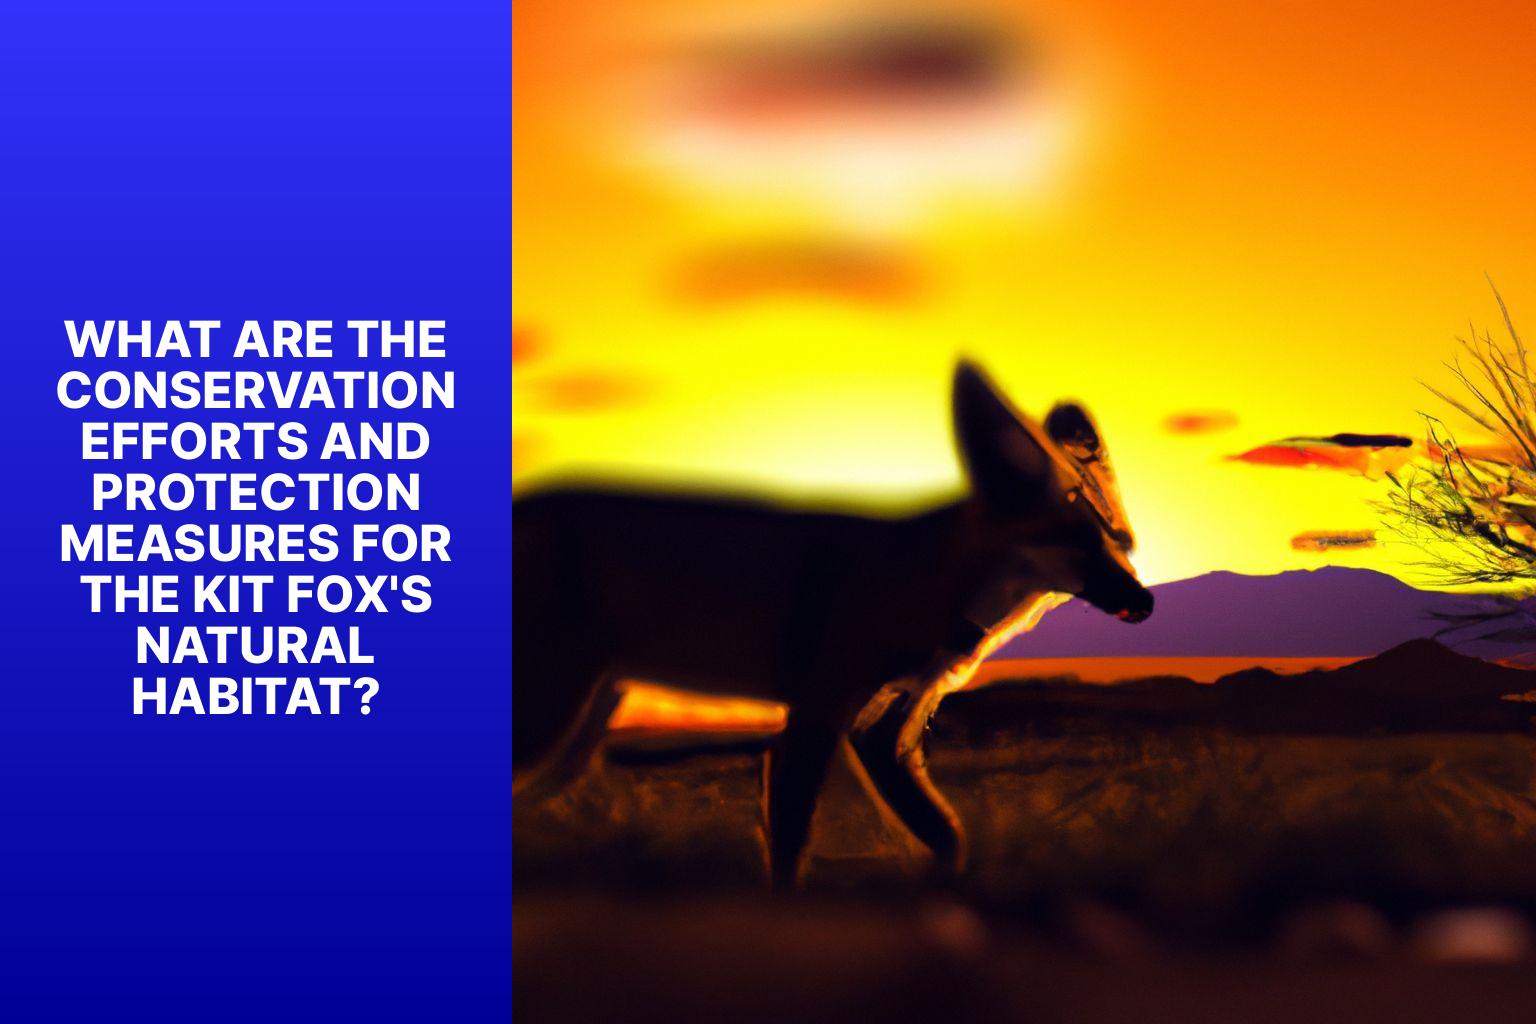 What are the Conservation Efforts and Protection Measures for the Kit Fox